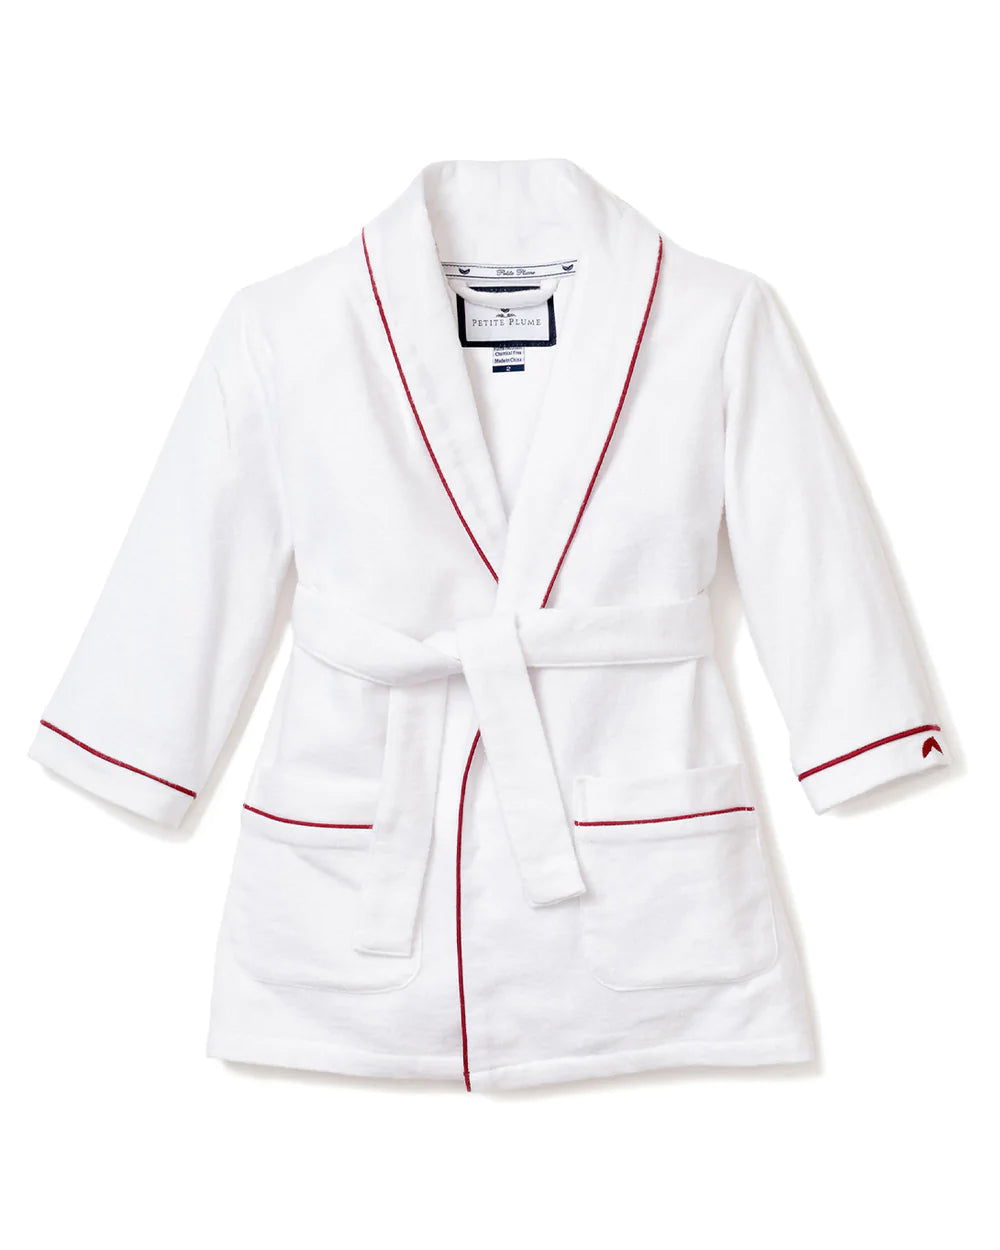 Petite Plume Children's White Flannel Robe with Red Piping